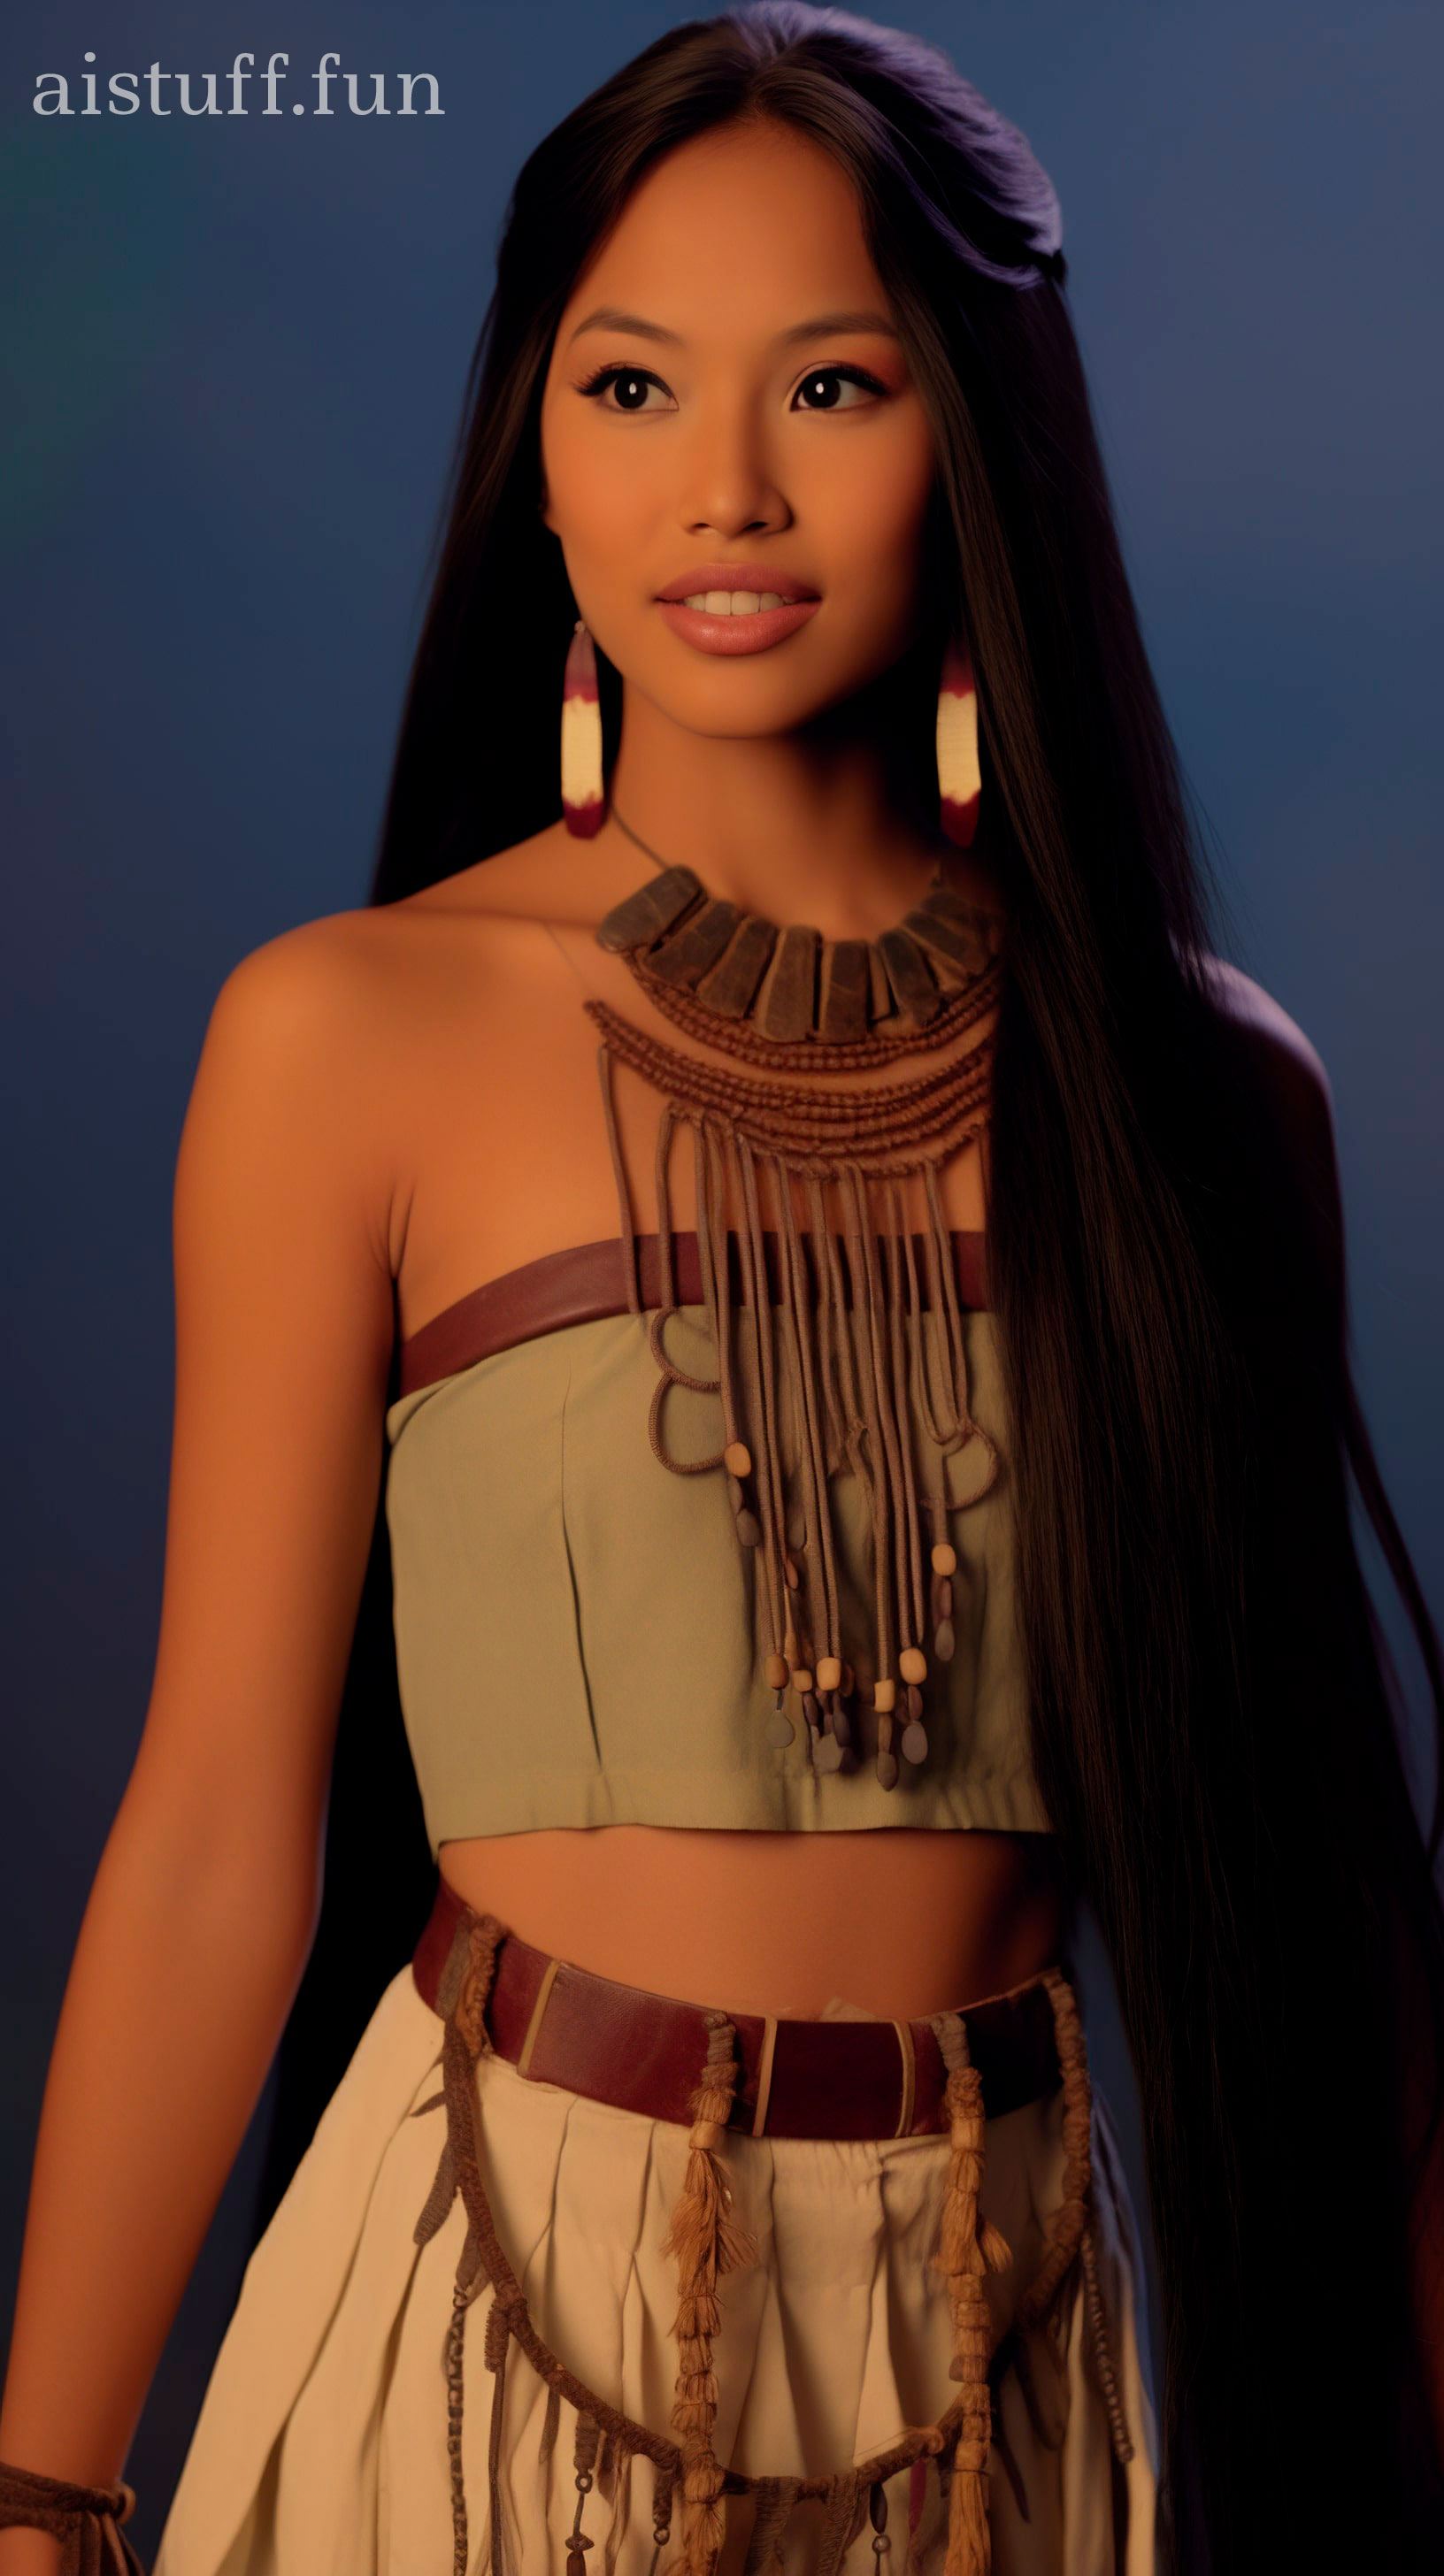 the real pocahontas in real life